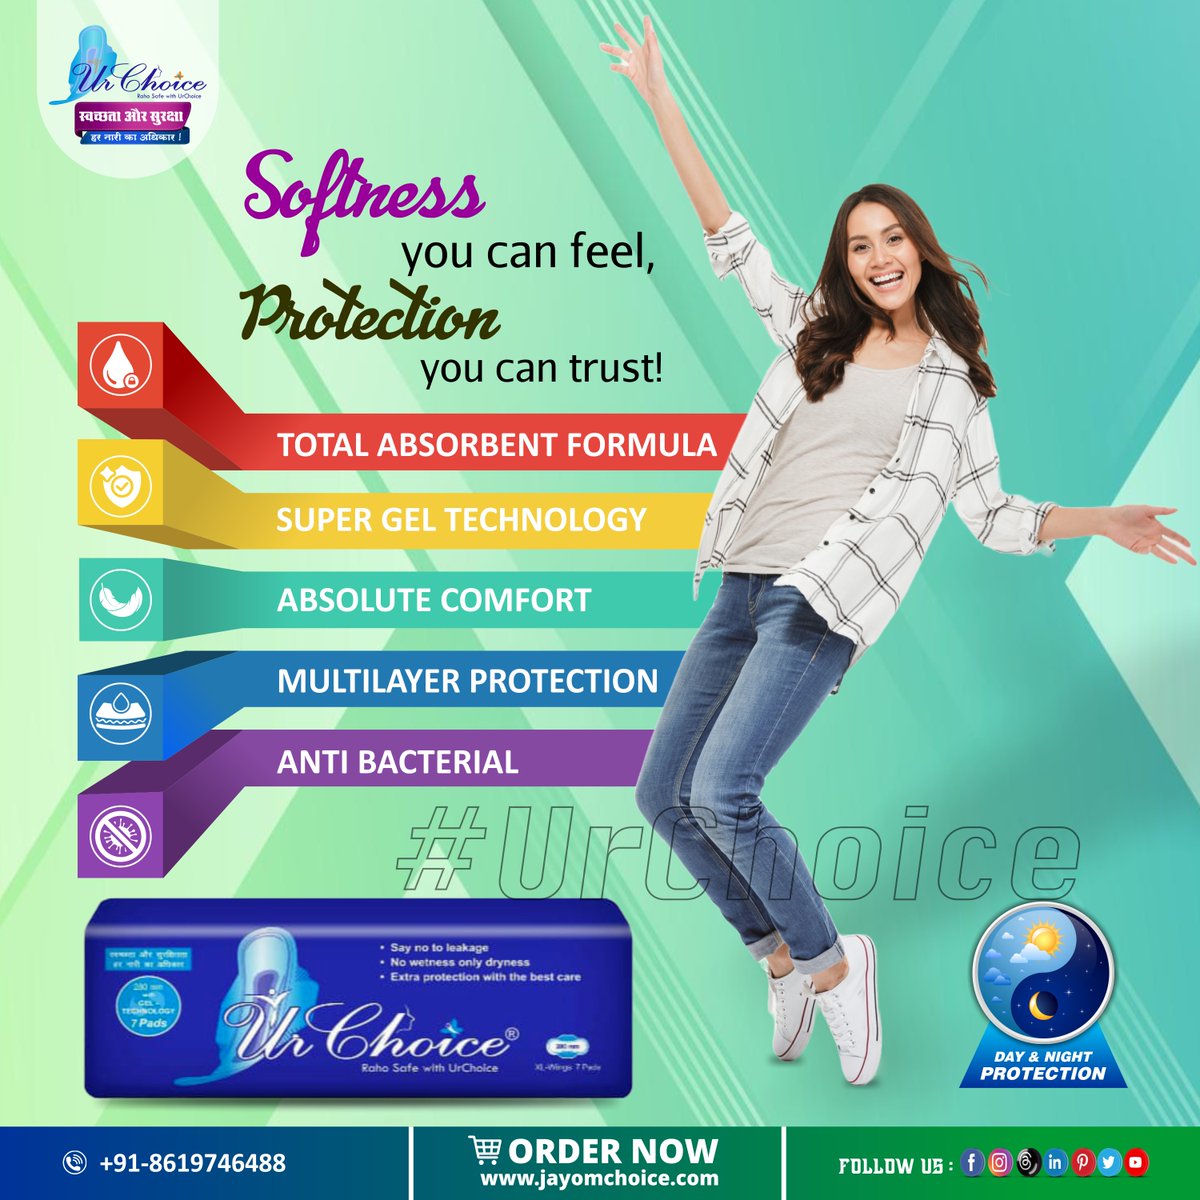 Experience Unparalleled Softness and Ultimate Protection with Ur Choice. 
Order Now : jayomchoice.com
#StayPrepared #urchoice #PeriodProtection #leakagefree #comfort #Absorption #WomenEmpowerment #Period #SanitaryPads #Menstruation #Covishield #IndianCricketTeam